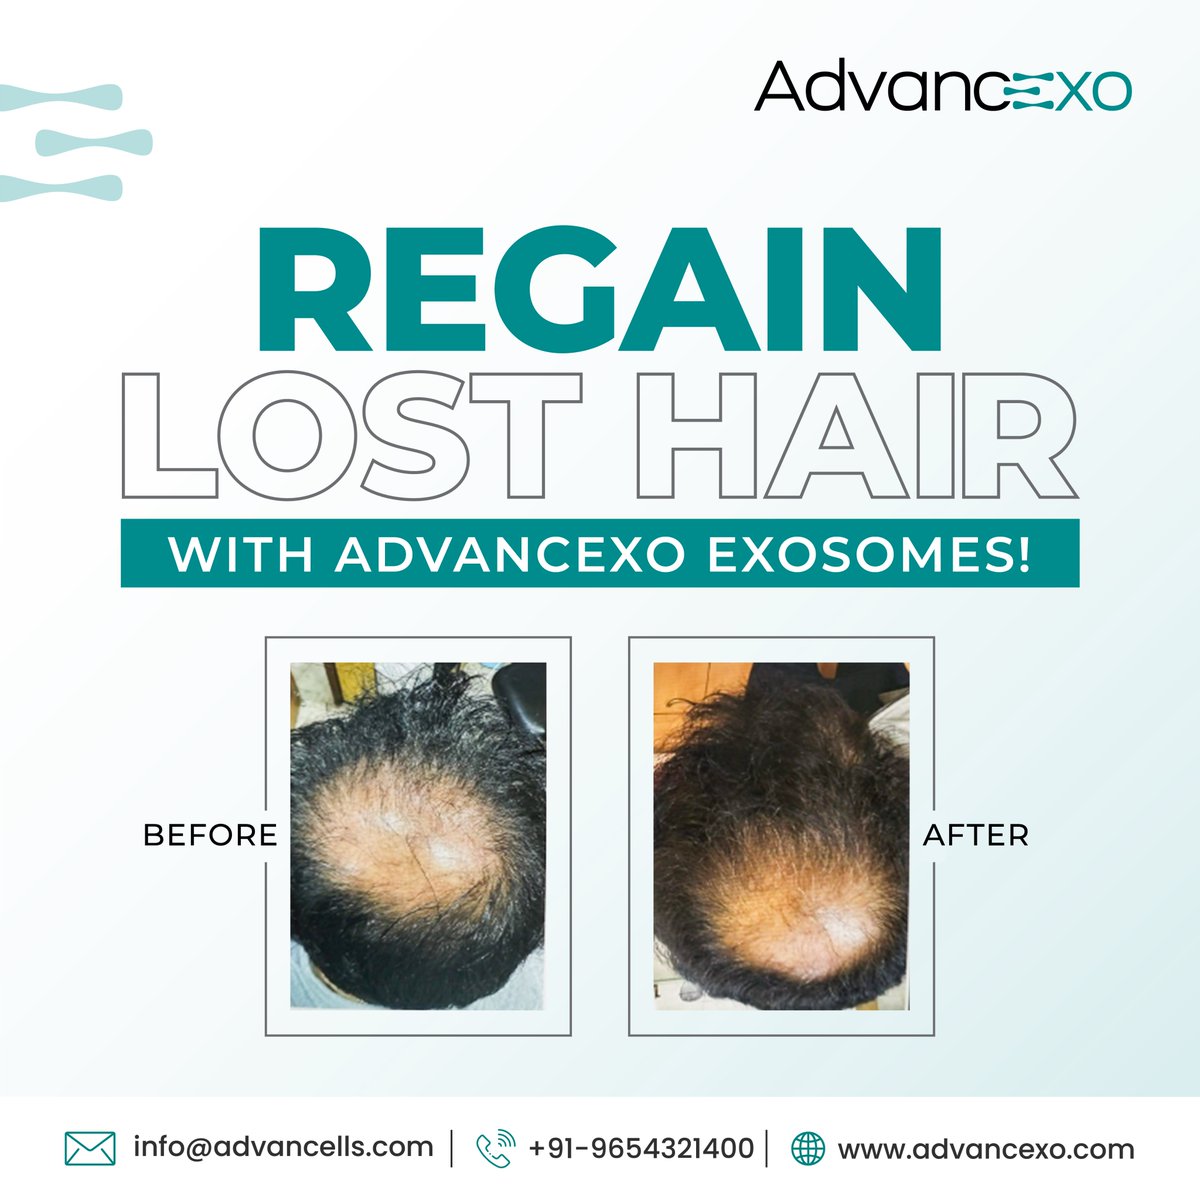 Say goodbye to #hairloss!

Advancexo #Exosomes offers a revolutionary approach to #hairregrowth. The treatment delivers exceptional results for a more confident you.
To know more, call:  +91 9654321400

#Advancexo #exosomestherapy #testimonials #hairlosshelp #hairlosssolution